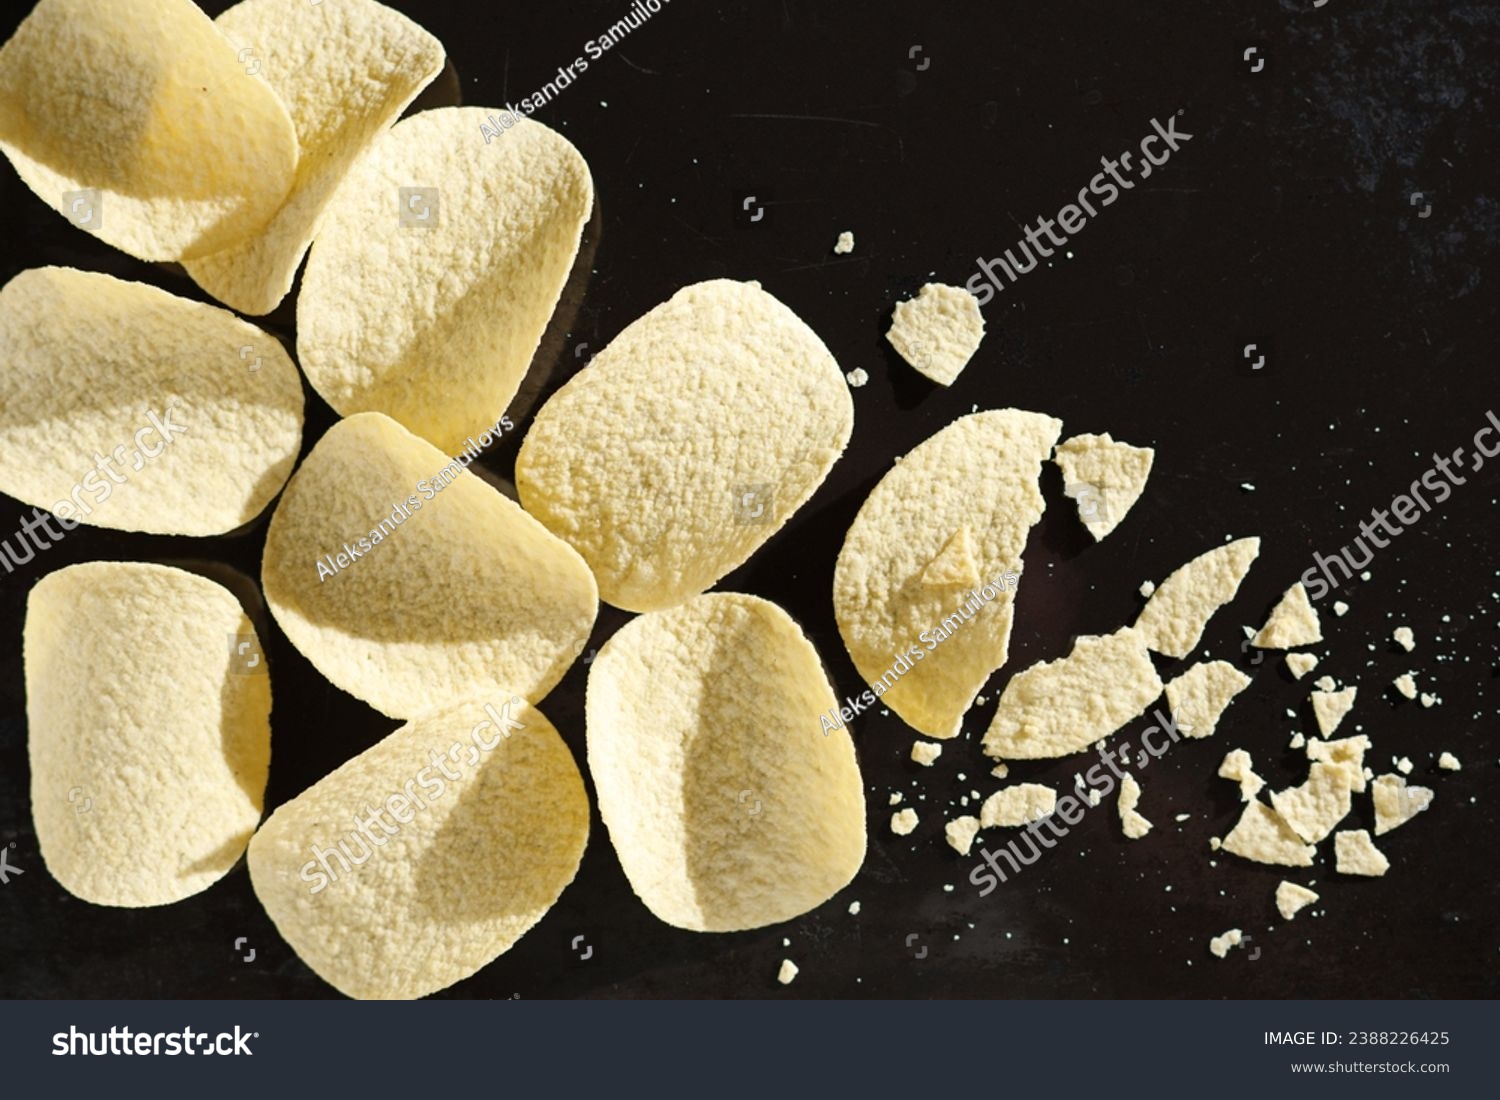 Tasty potato chips whole end broken on a black tray background, top view. Good snack for beer #2388226425